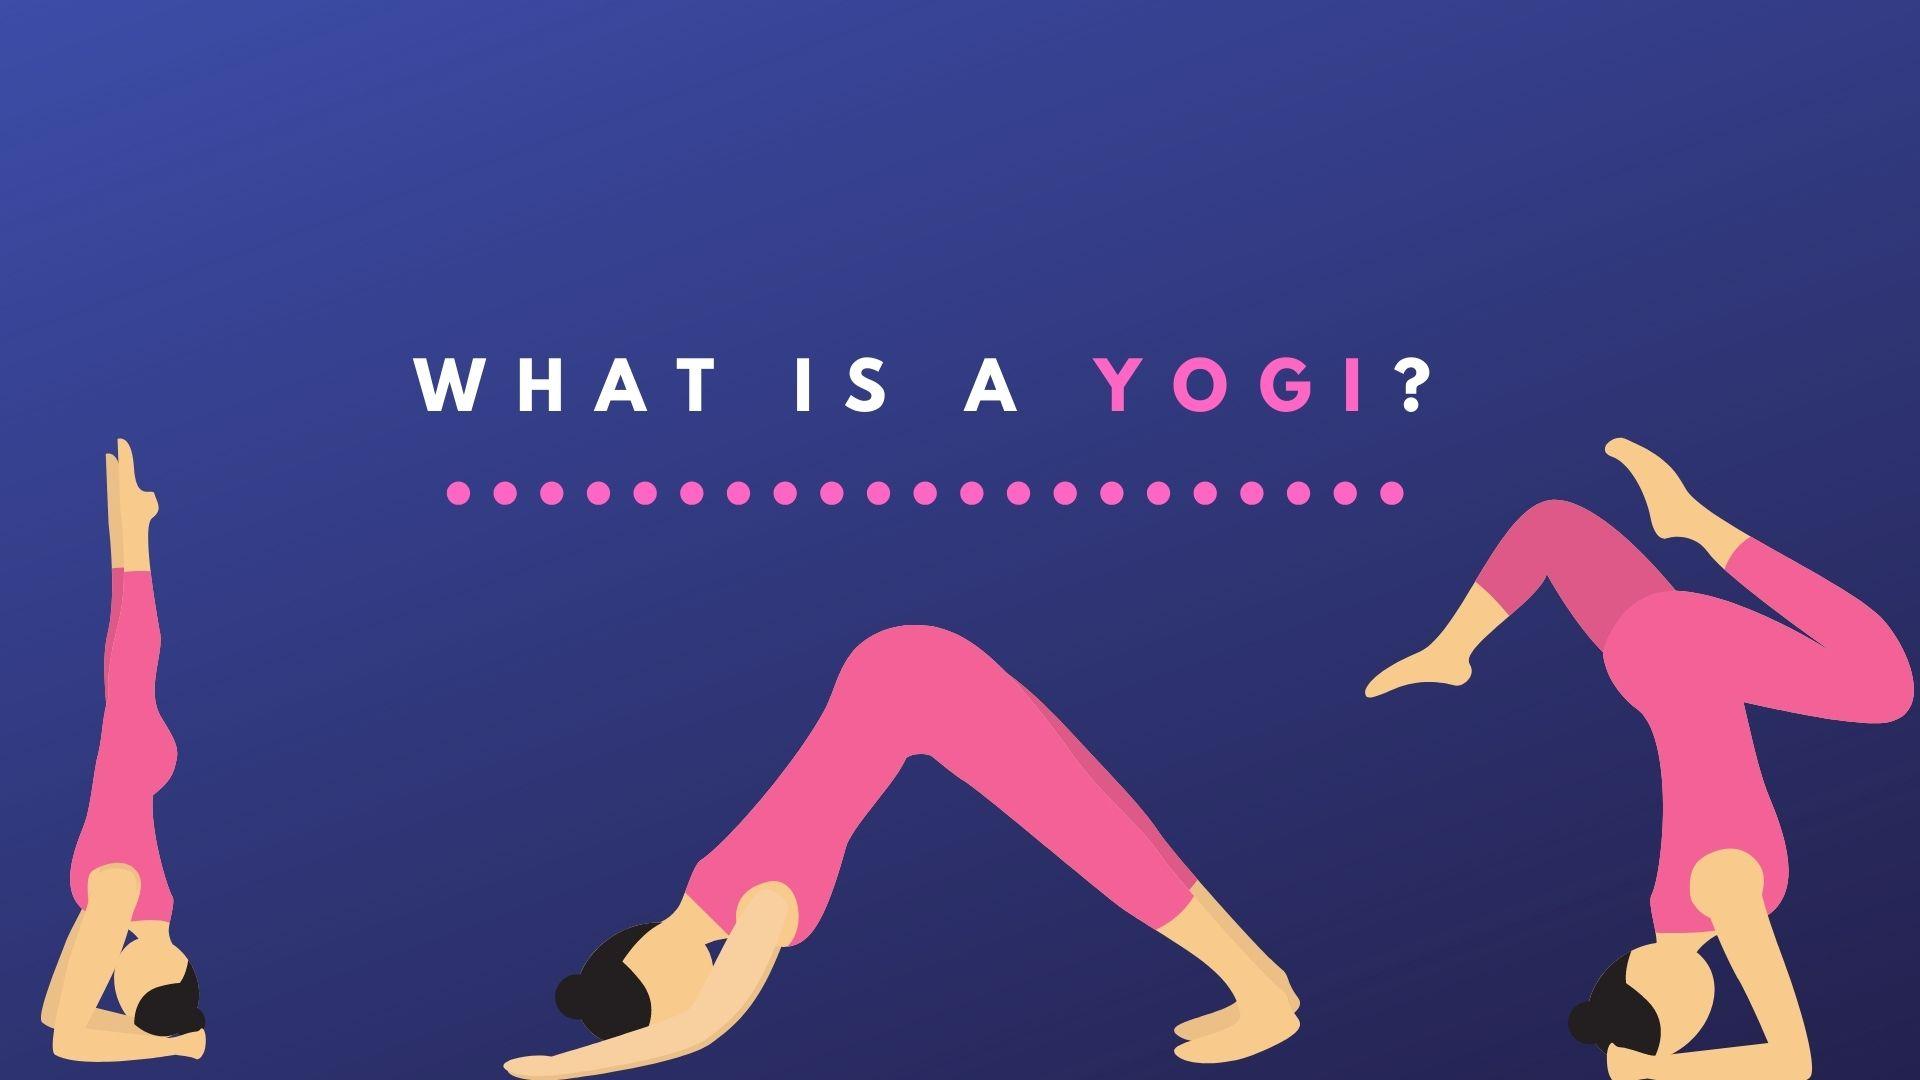 Does competition stretch yoga's soul?